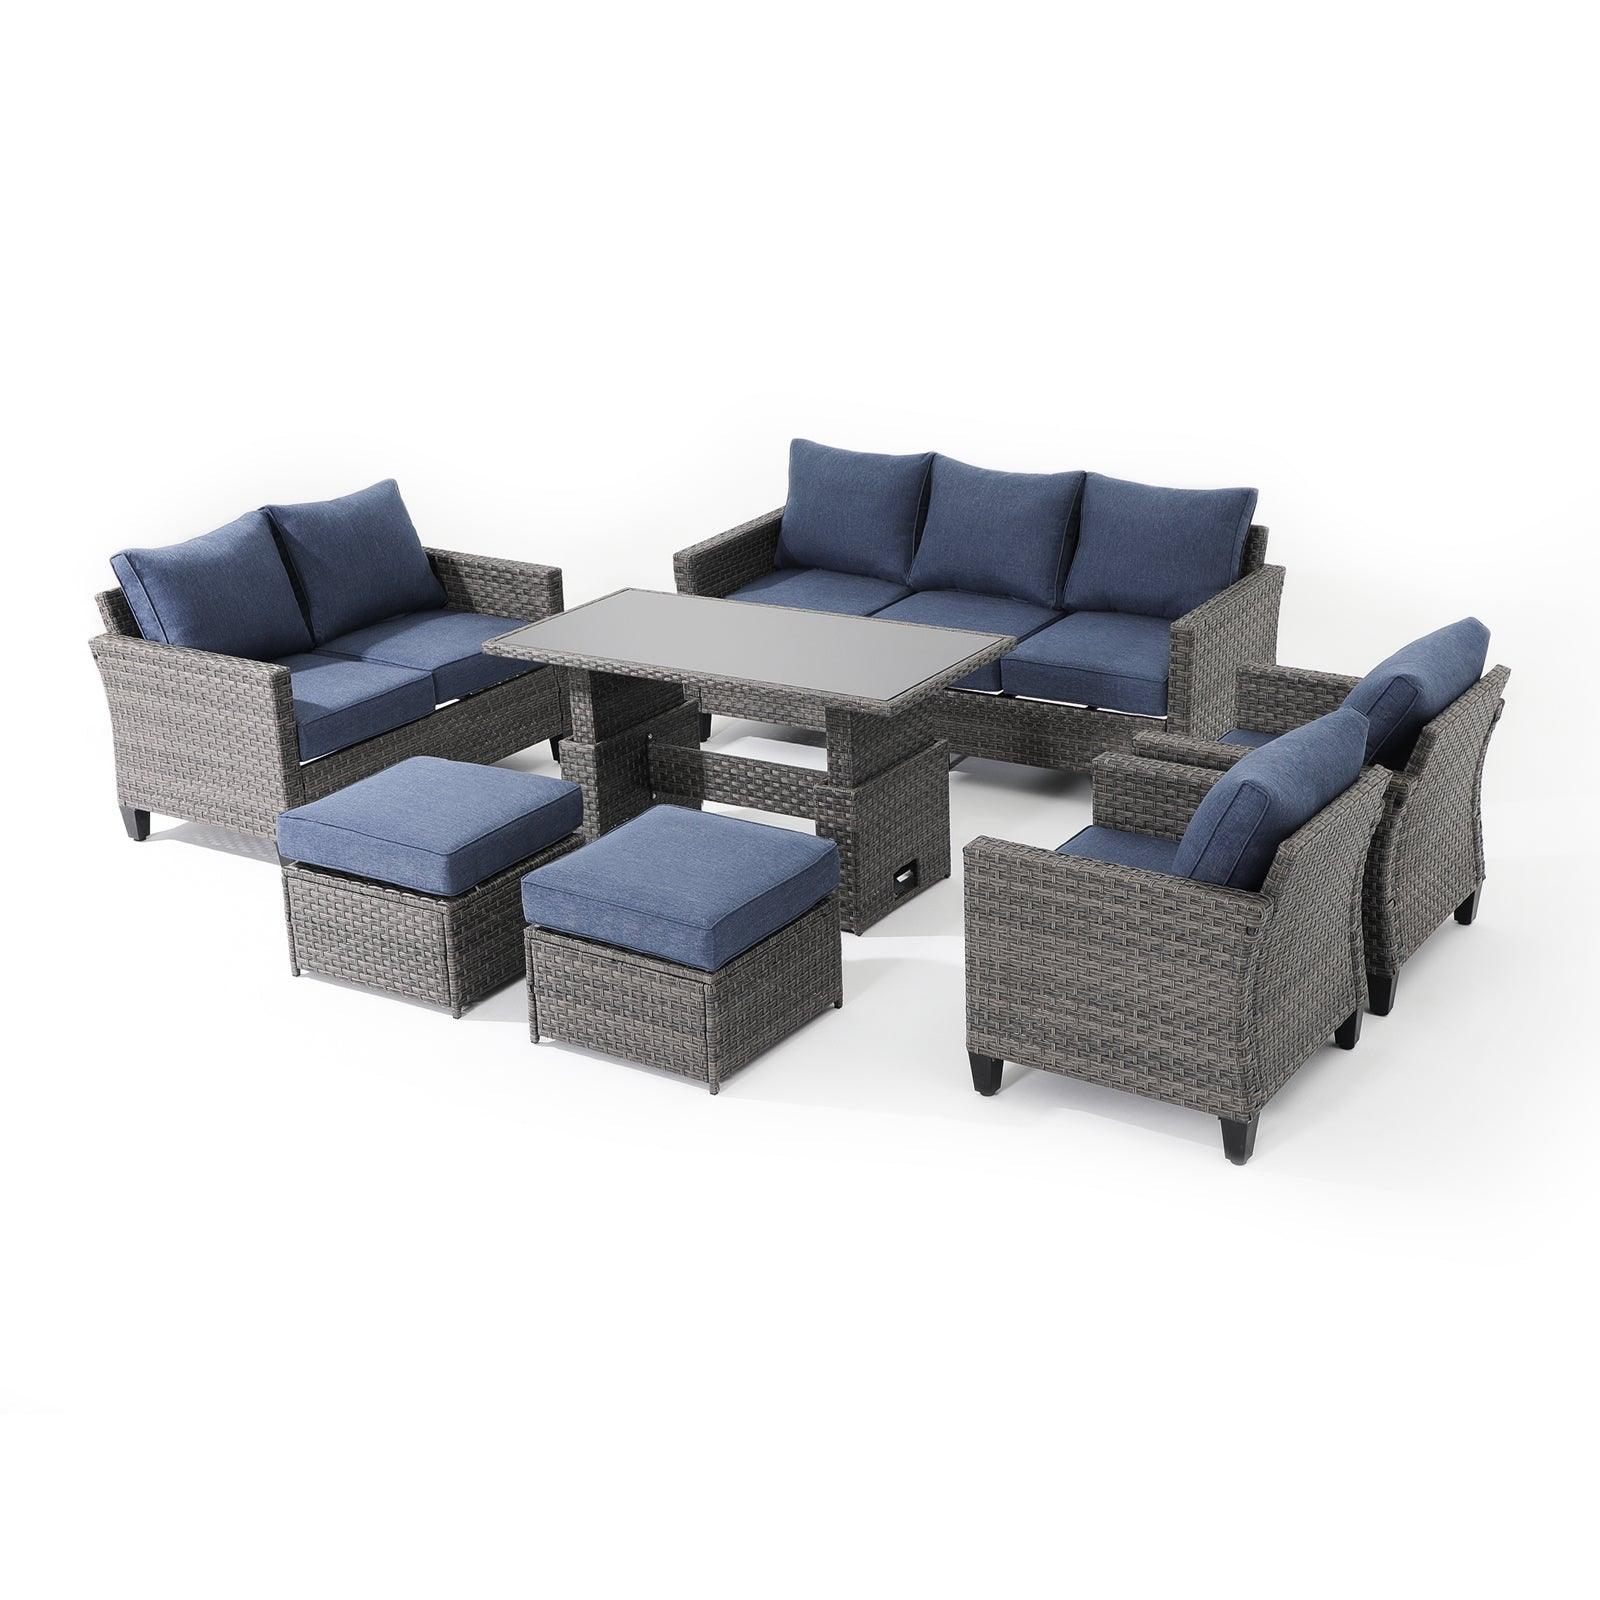 Ayia 7-Piece outdoor Sofa Set with Rattan design, Navy Blue cushions, a 3-seater sofa, 2 armchairs, 2 ottomans, 1 loveseat, 1 lift-top outdoor dining table, left - Jardina Furniture #color_Navy blue#piece_7-pc. with ottomans & Table